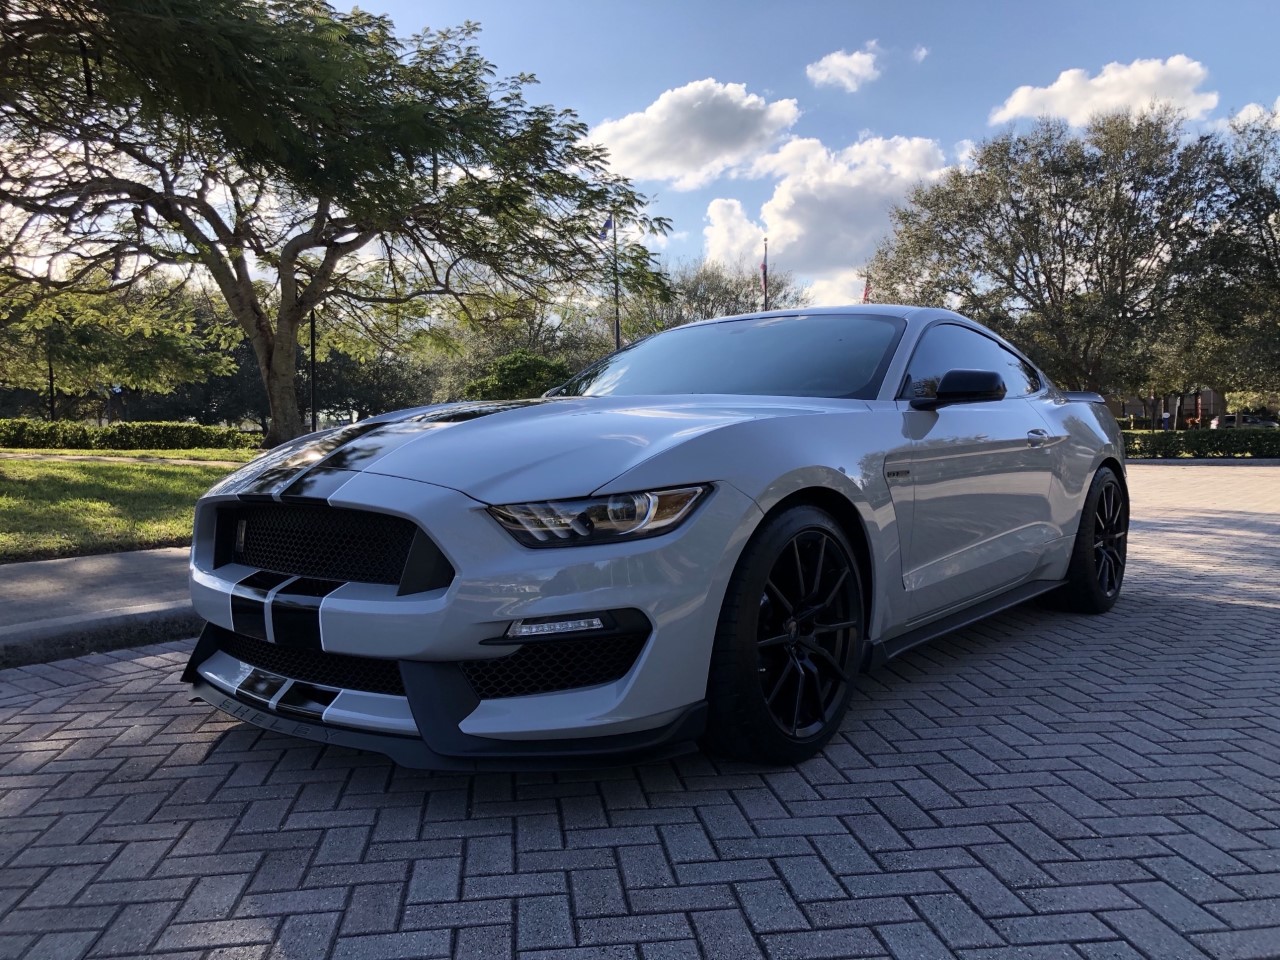 Florida - For Sale: 2016 GT350 - Avalanche Gray | 2015+ S550 Mustang ...